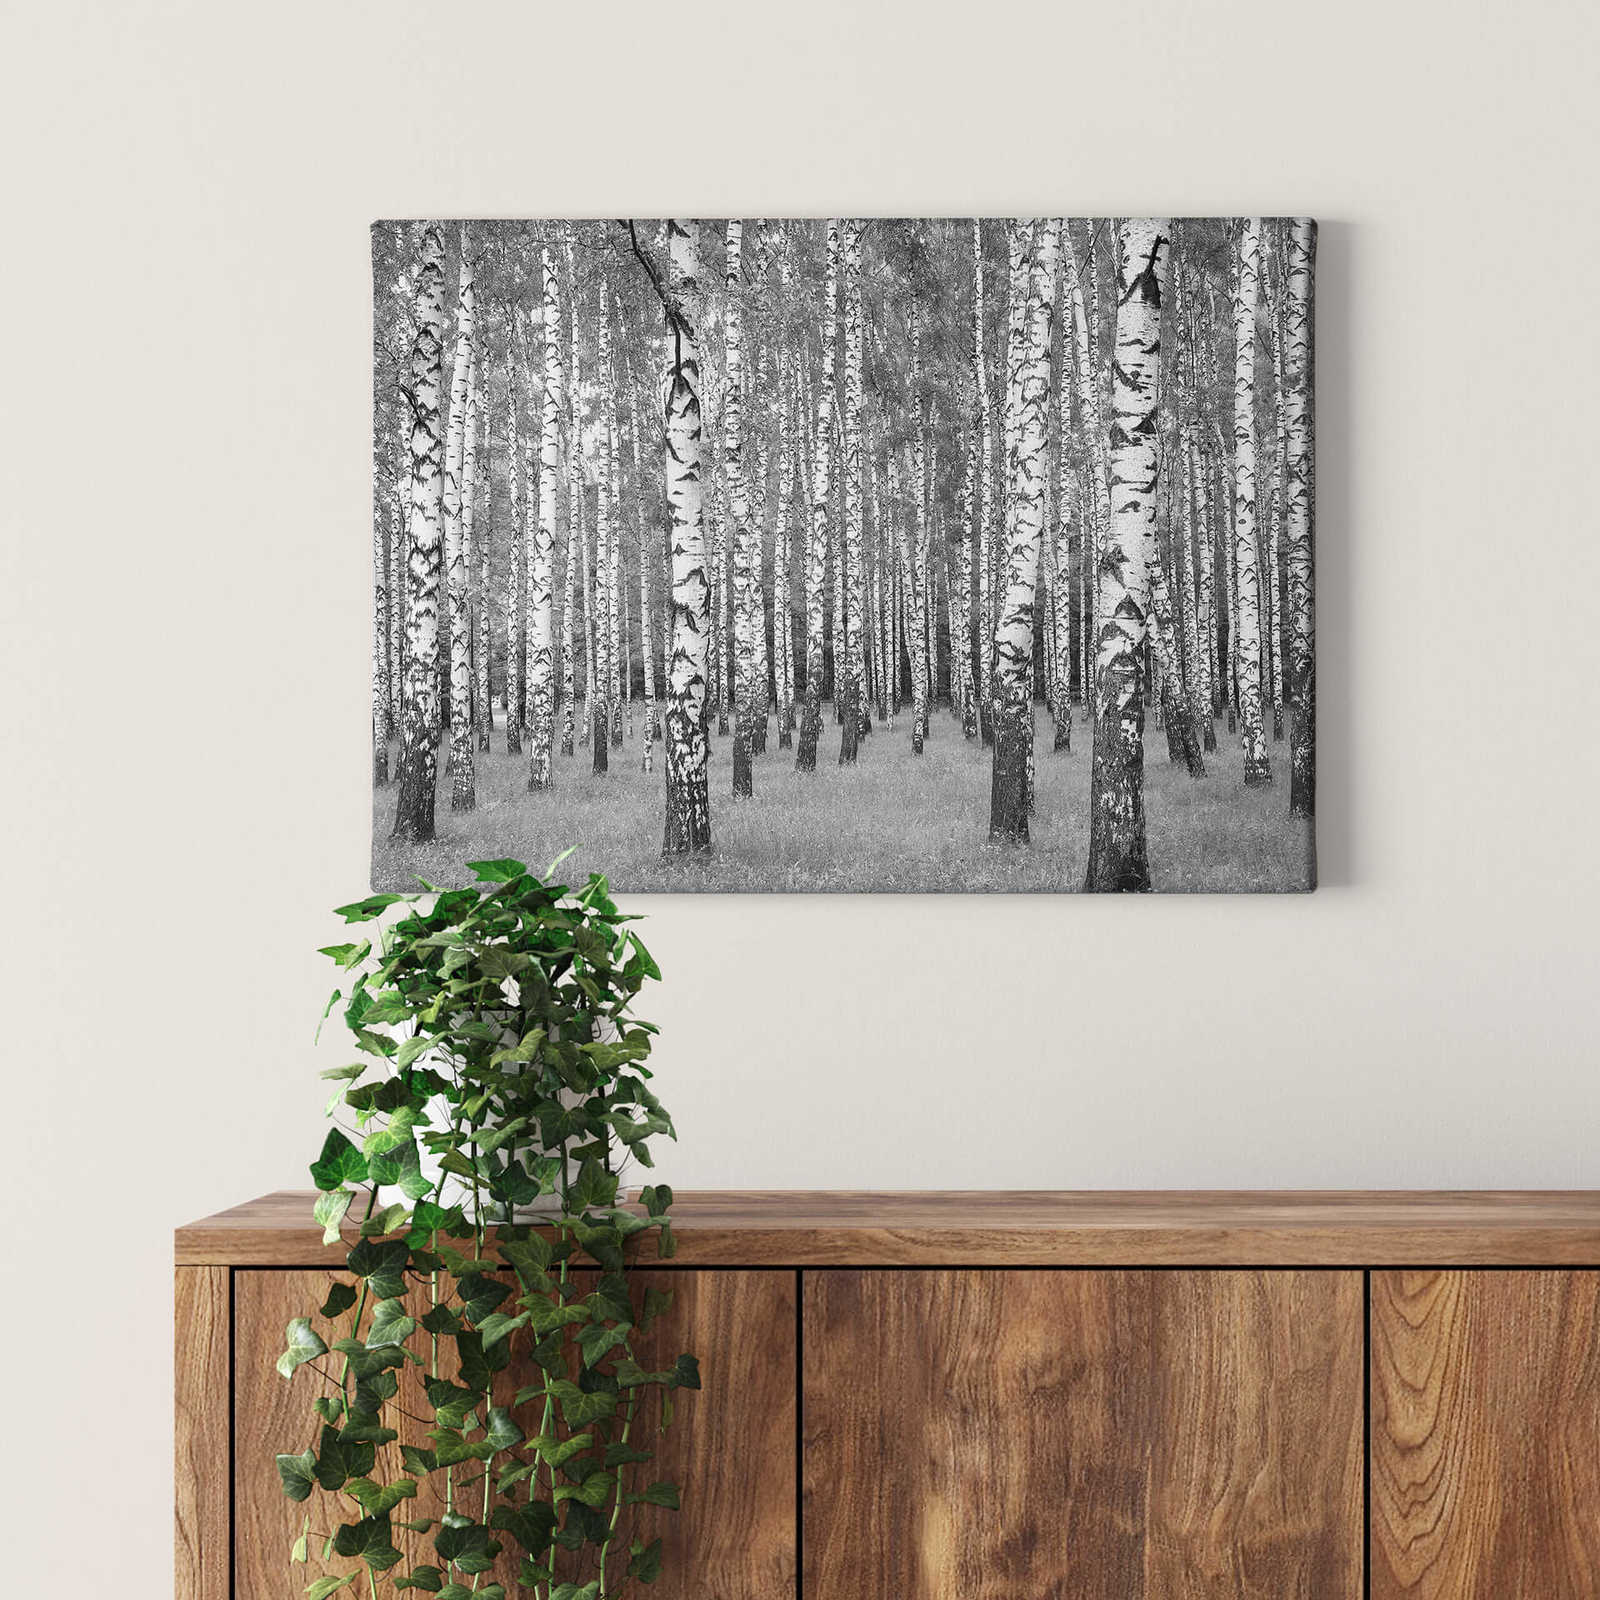             Birch forest canvas print black and white
        